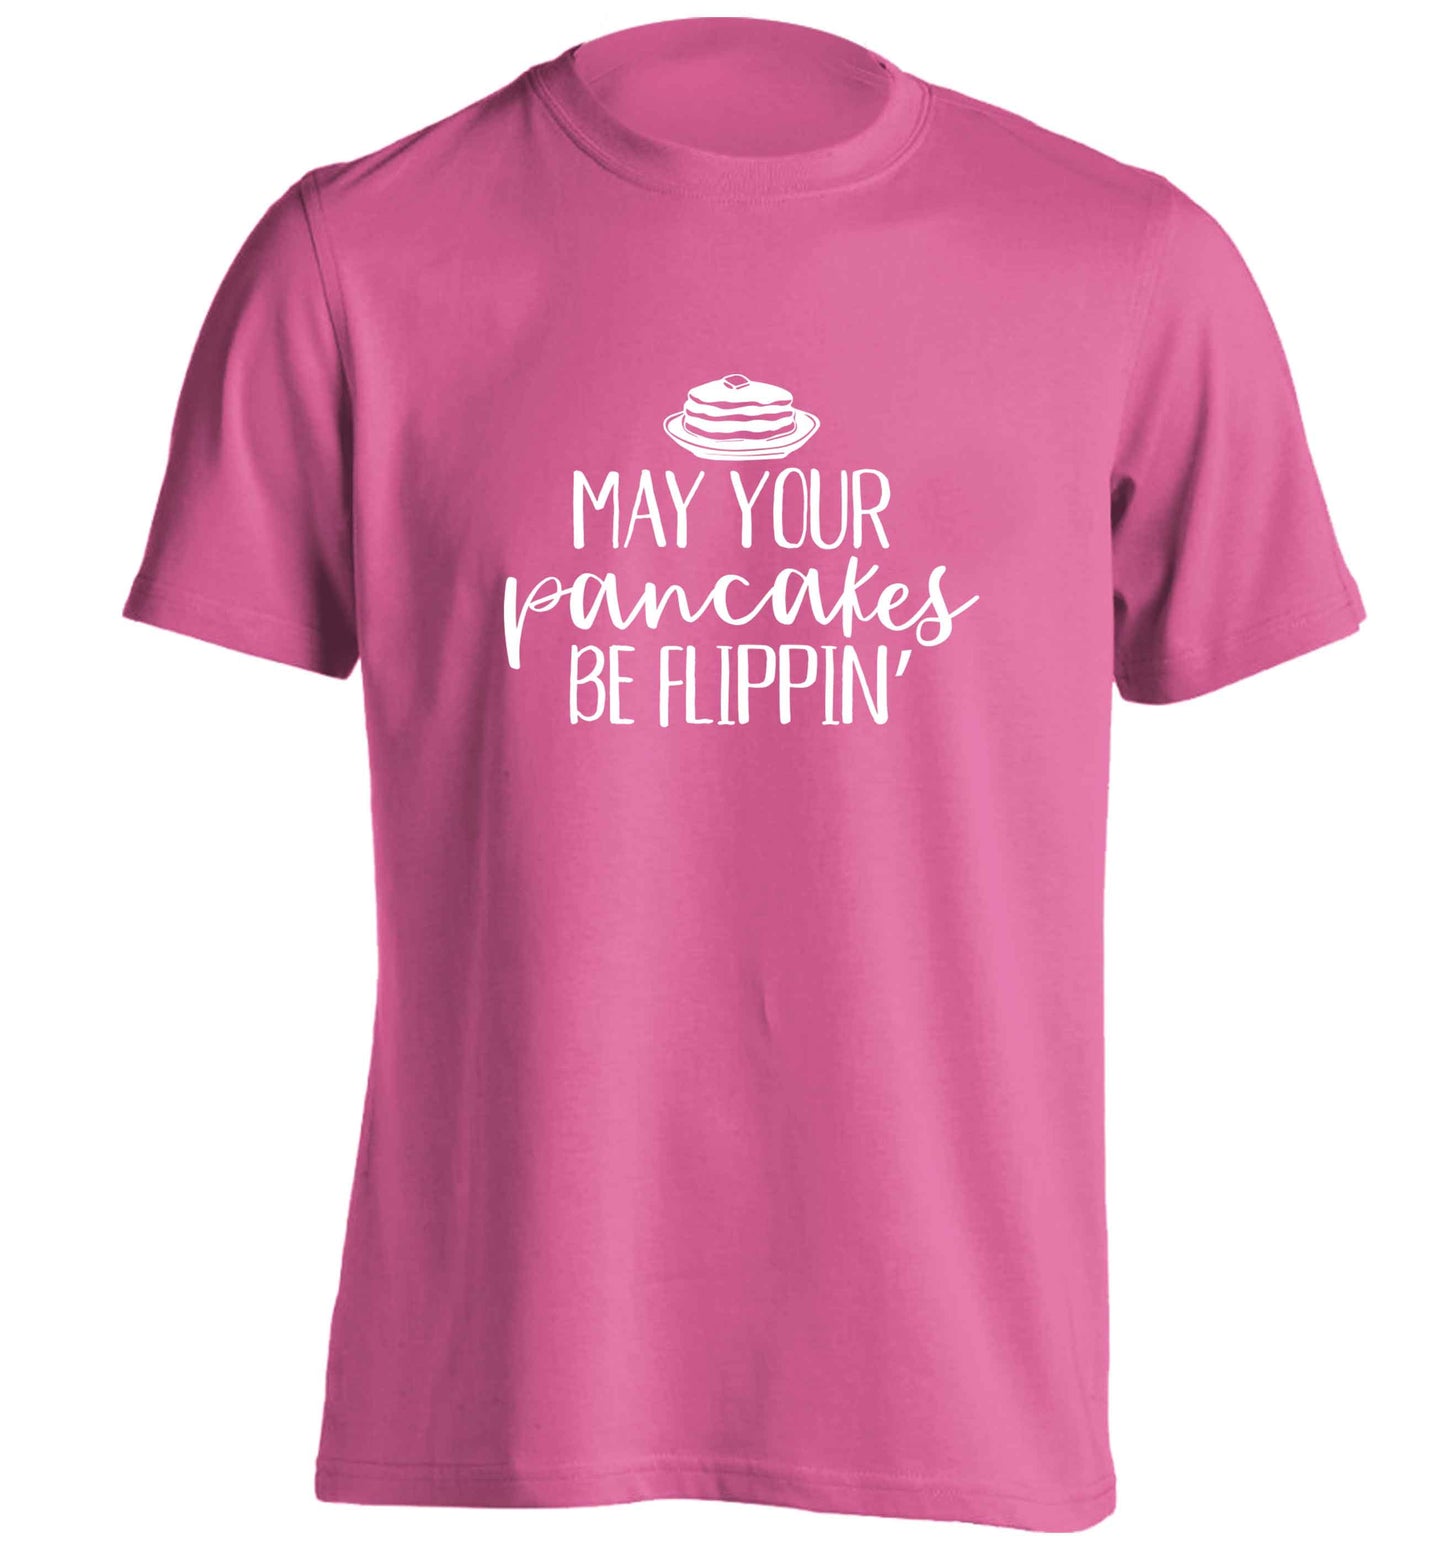 May your pancakes be flippin' adults unisex pink Tshirt 2XL